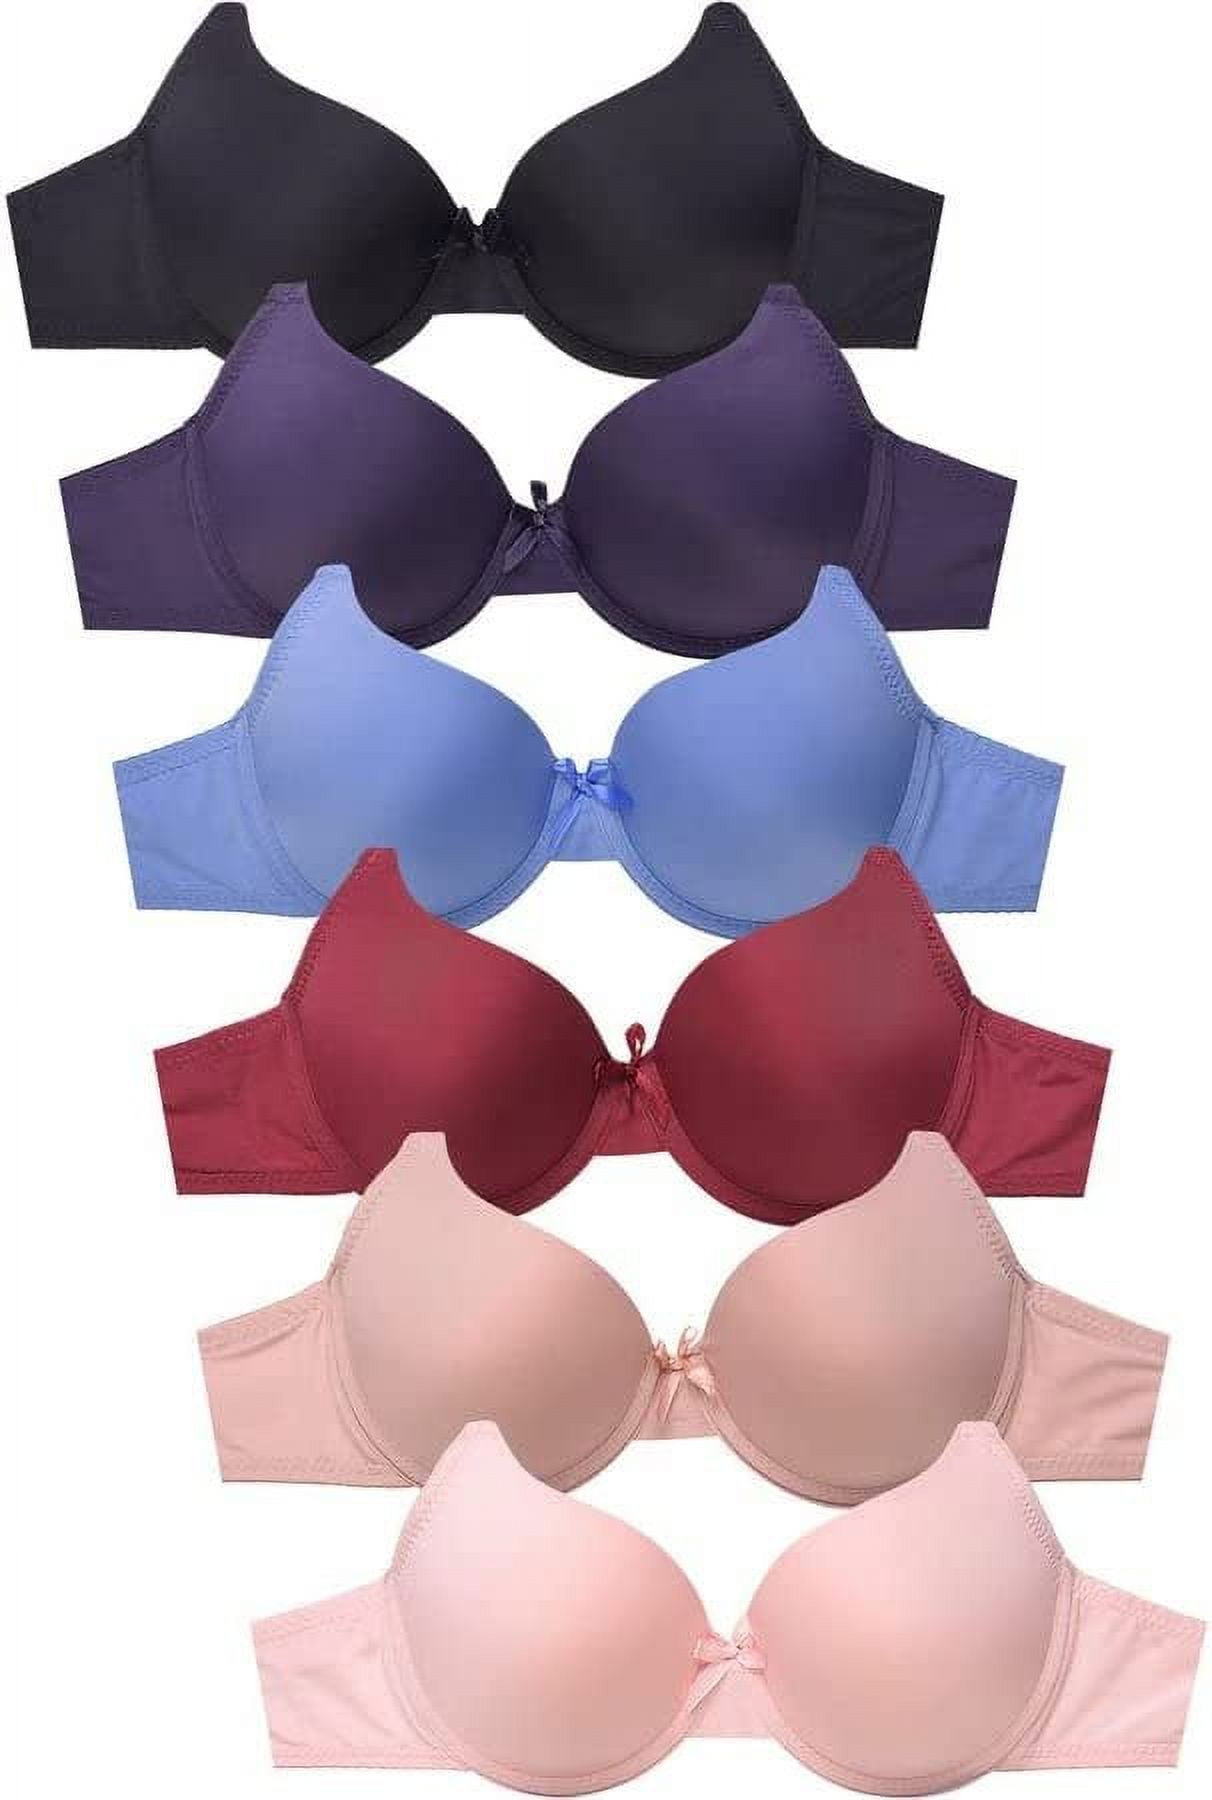 Mamia Women's Basic Lace/Plain Lace Bras Pack of 6- Various Styles